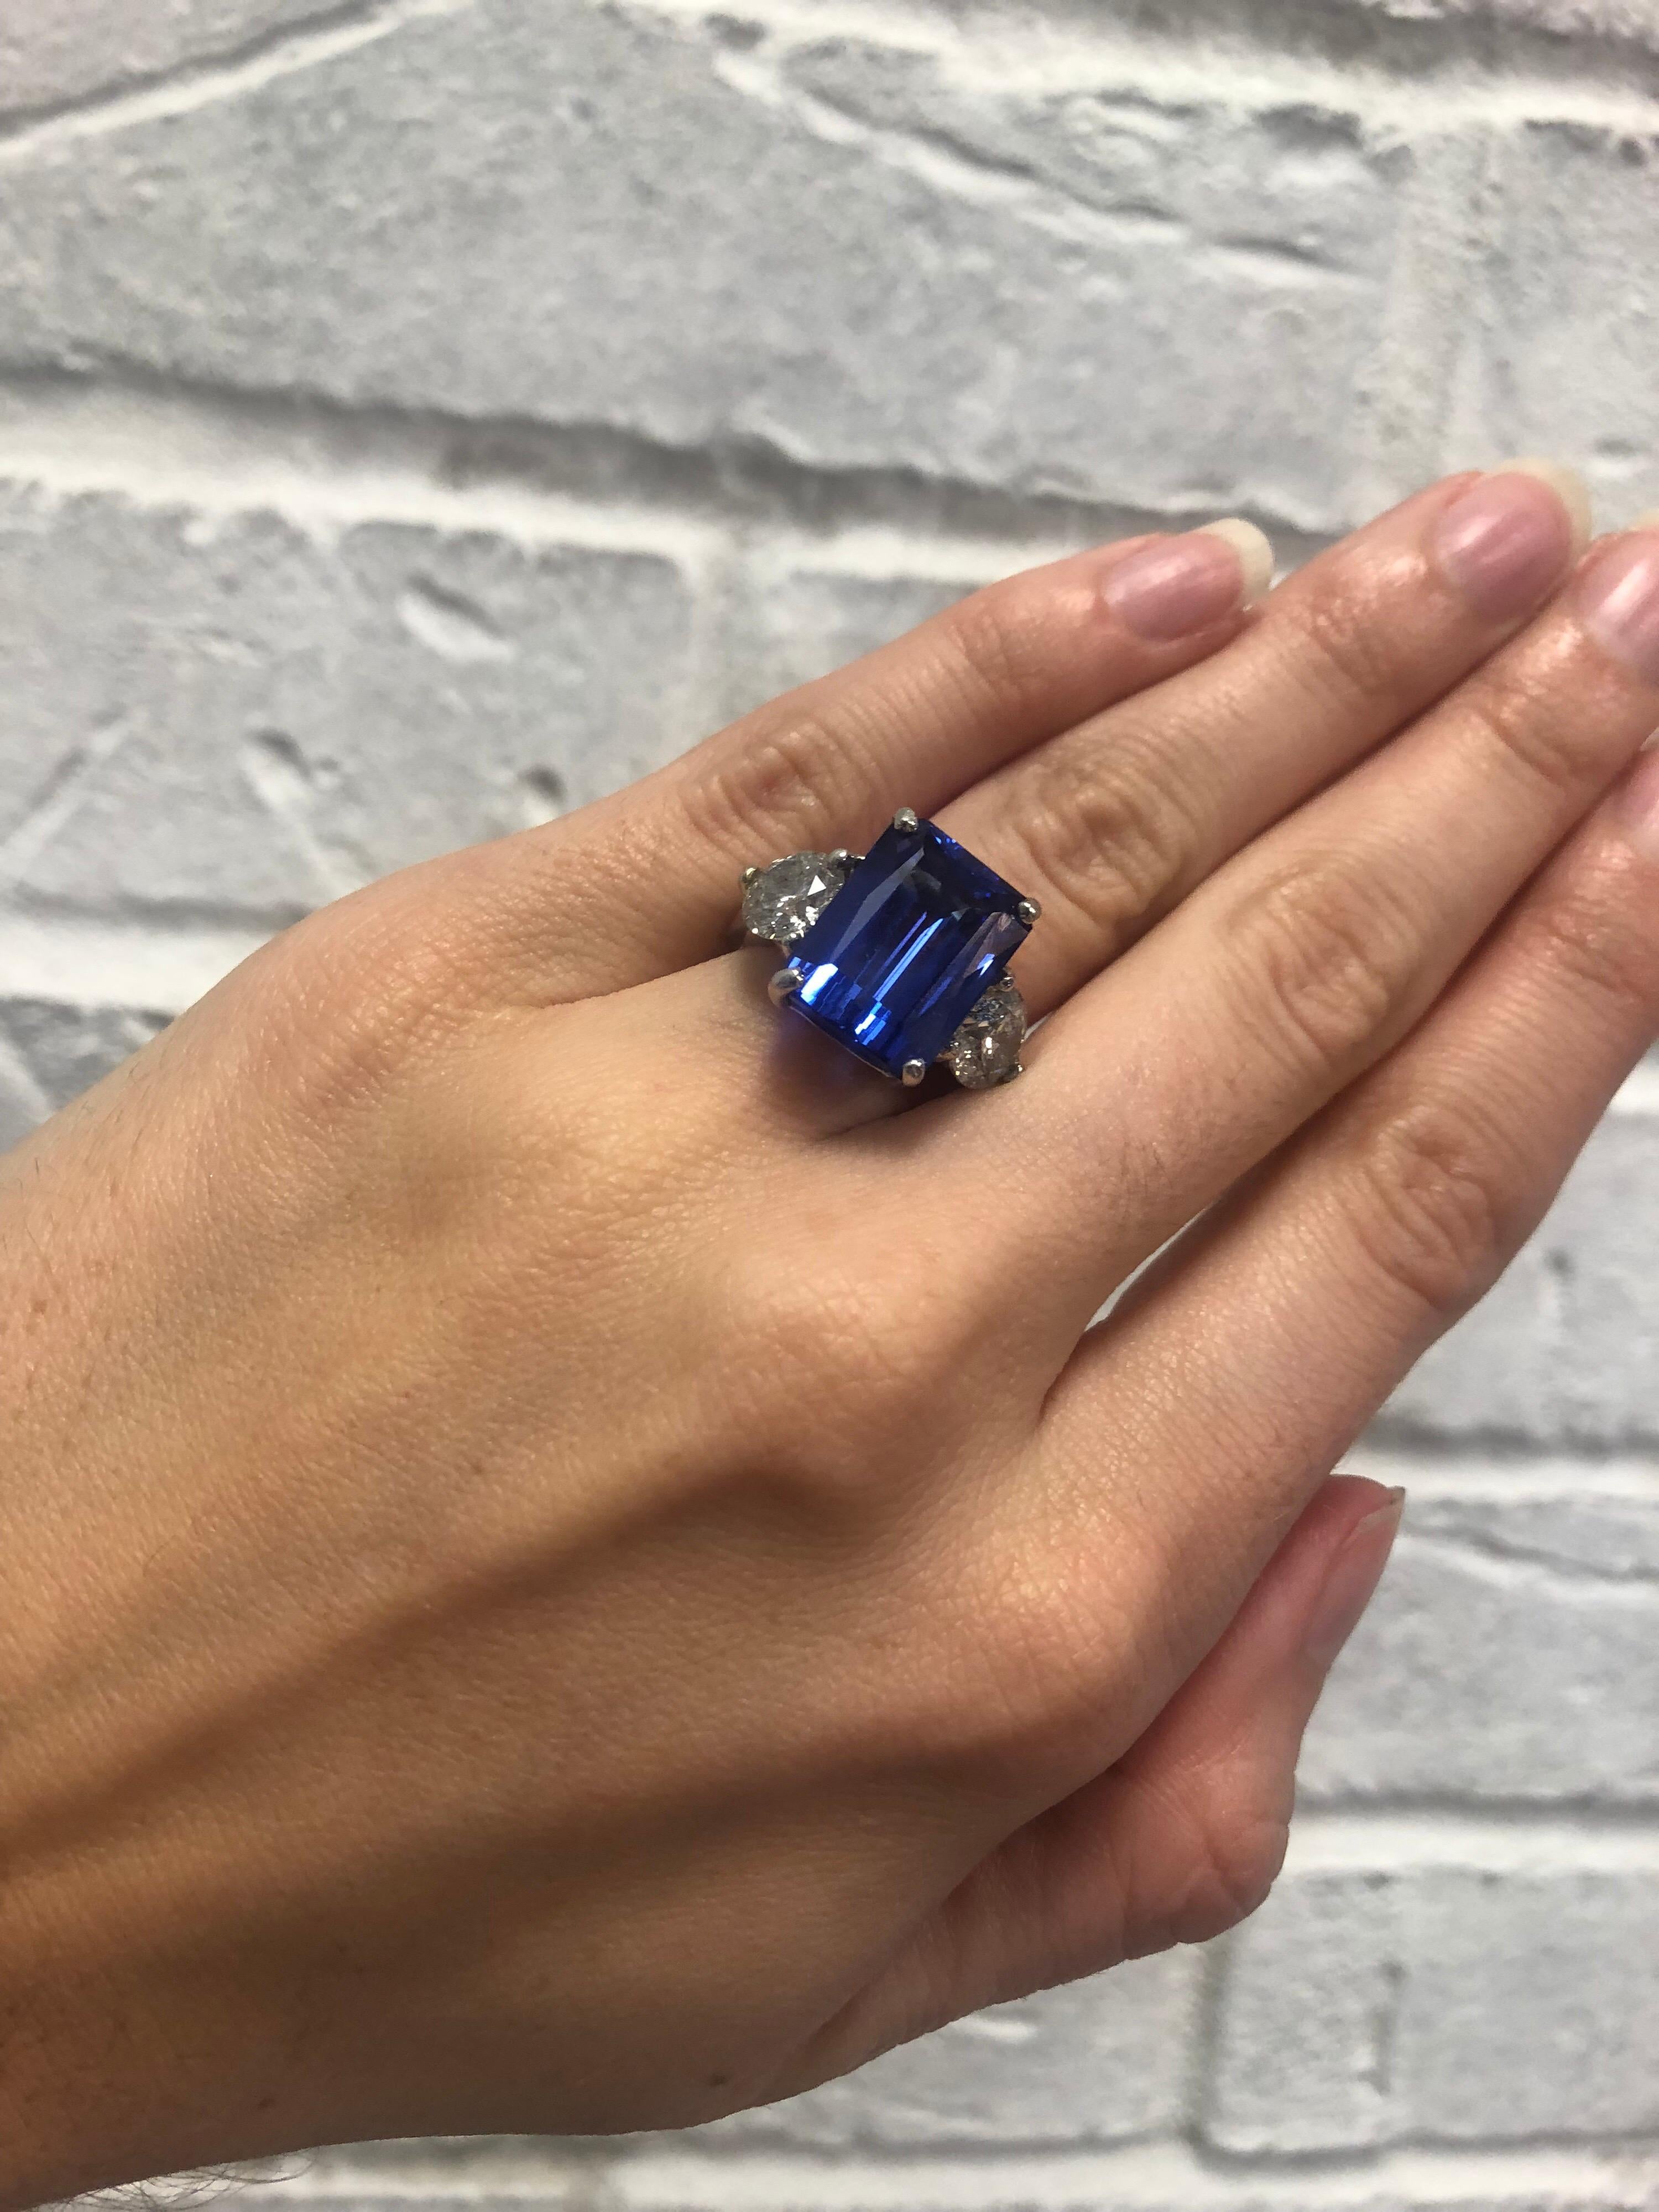 Beautiful platinum 3 stone emerald cut tanzanite and diamond ring. The center Emerald cut tanzanite weighs 7.1ct and the 2 two round brilliant cut diamonds weigh approximately 1.15 and are I-J in color and I2 in clarity. Ring size is 6 and can be